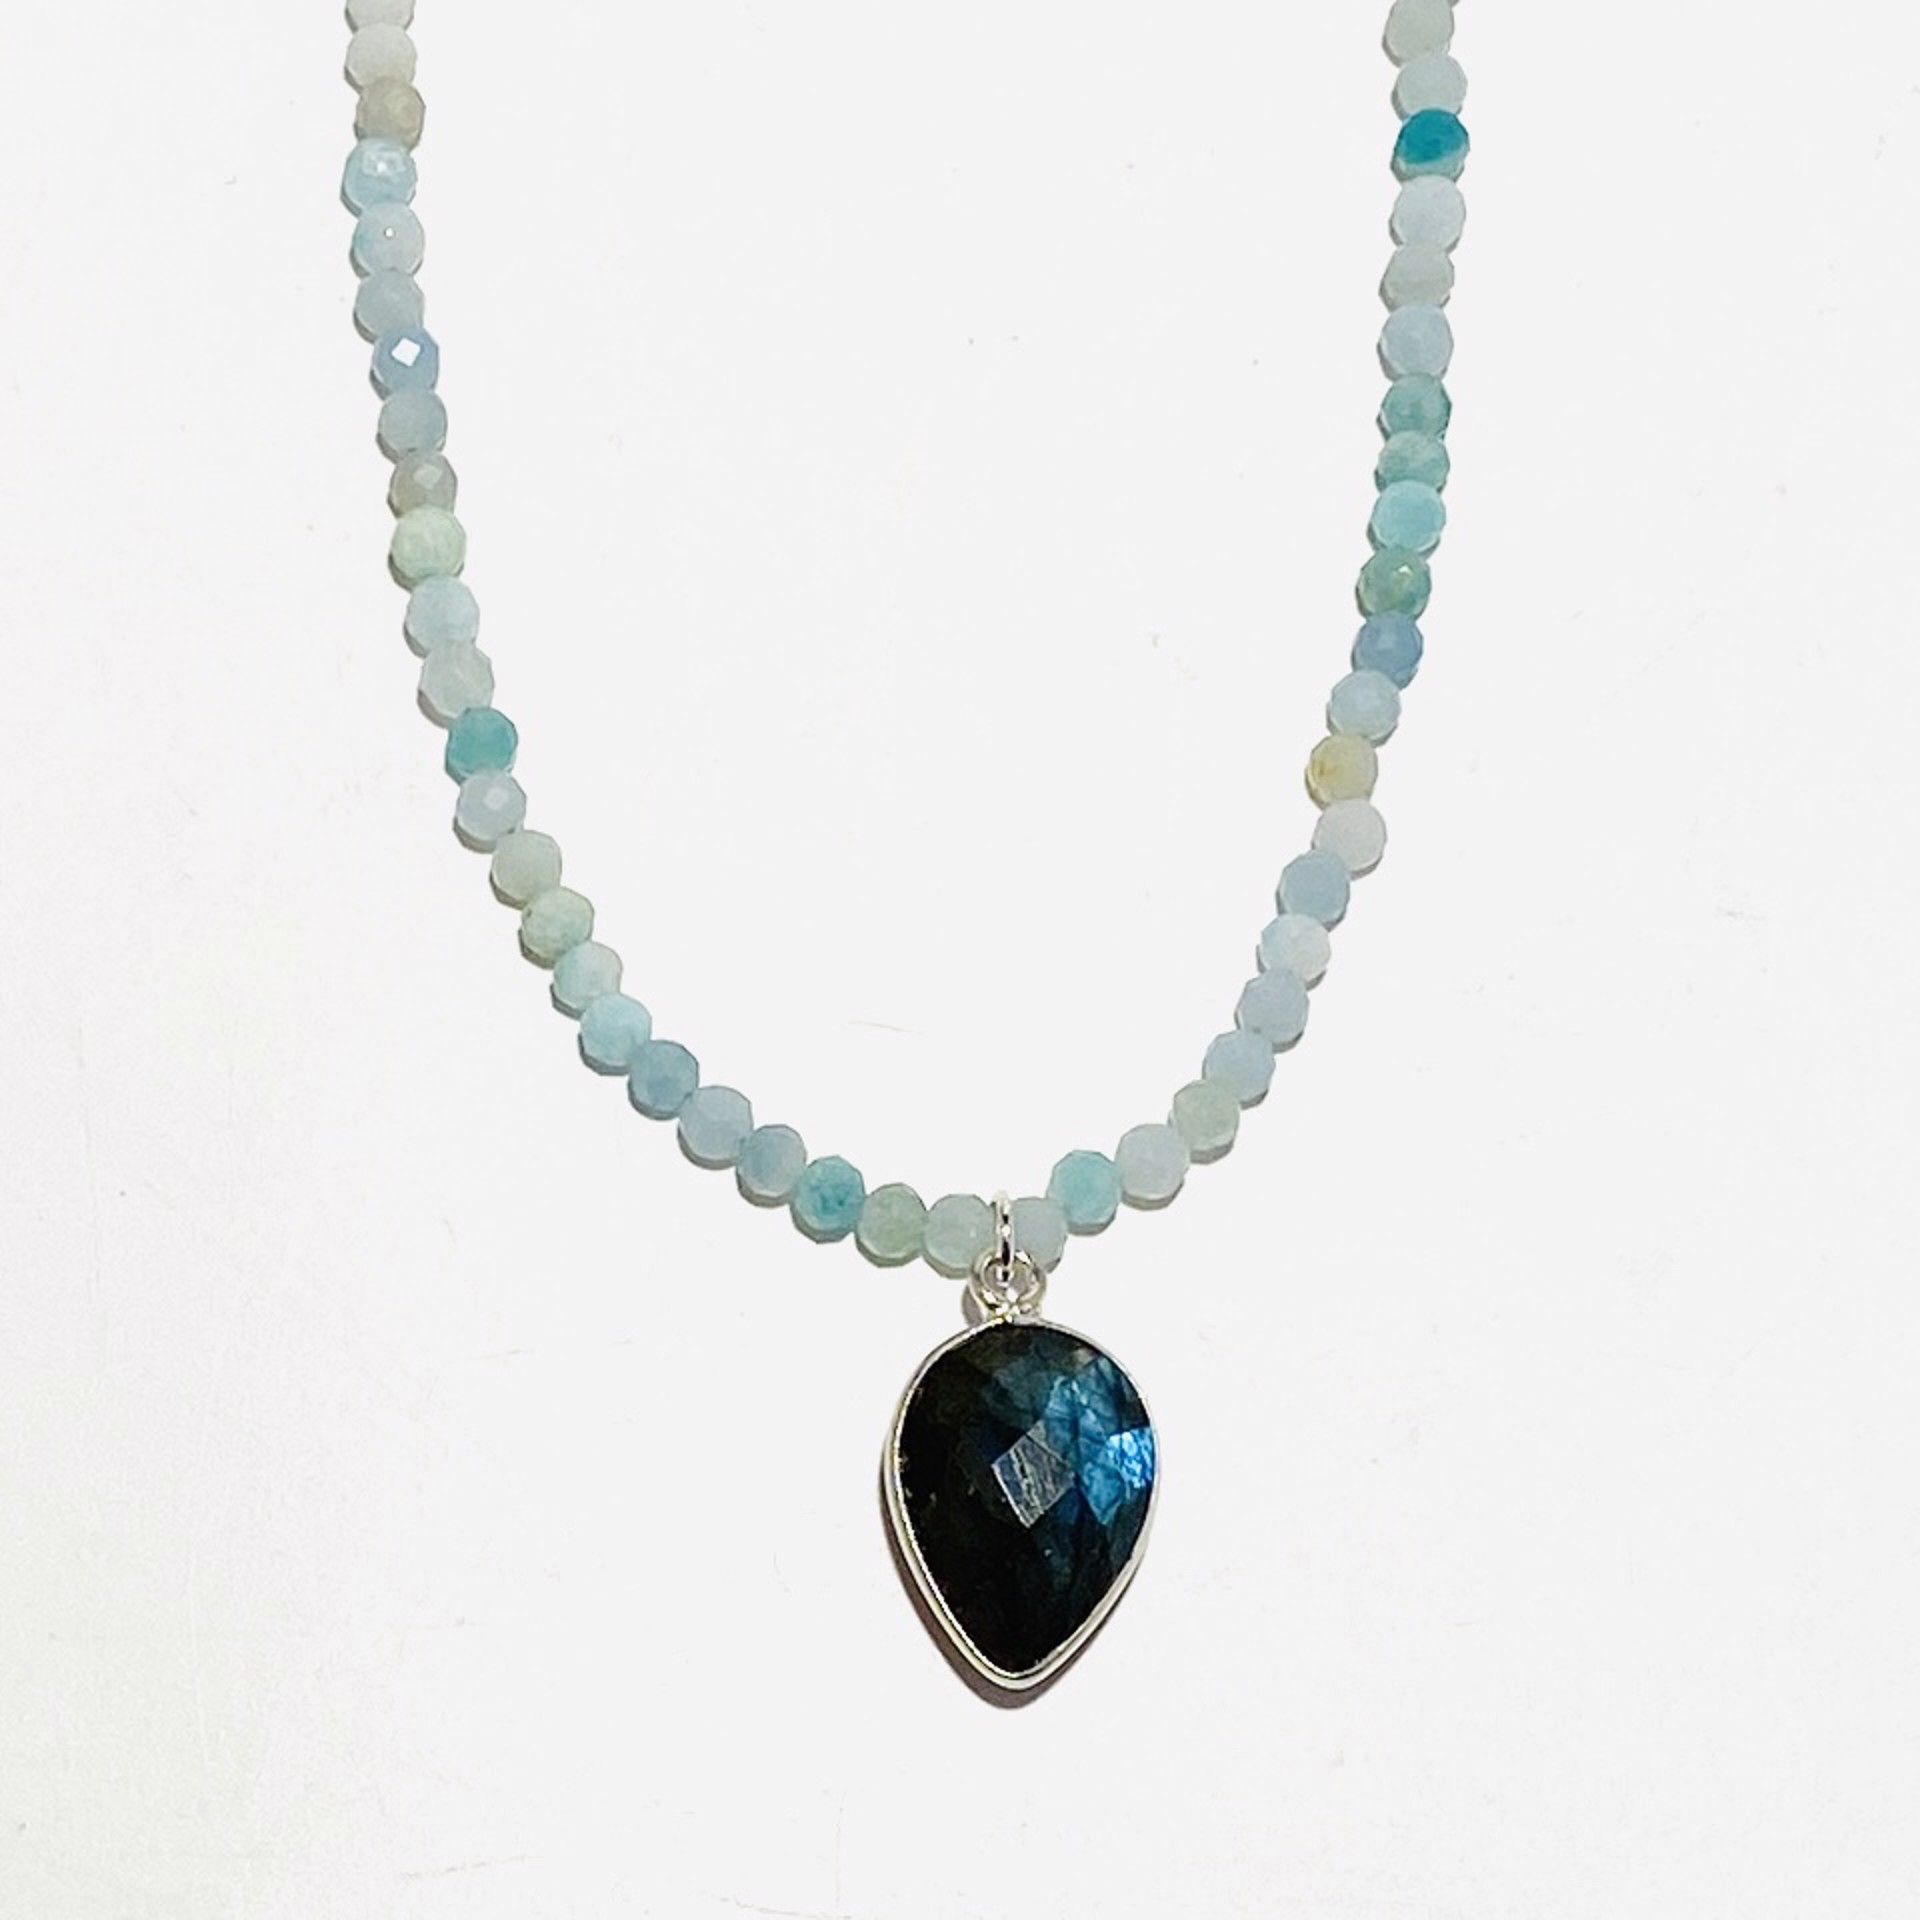 Faceted Amazonite, Faceted Labradorite Teardrop Pendant Necklace NT23-53 by Nance Trueworthy